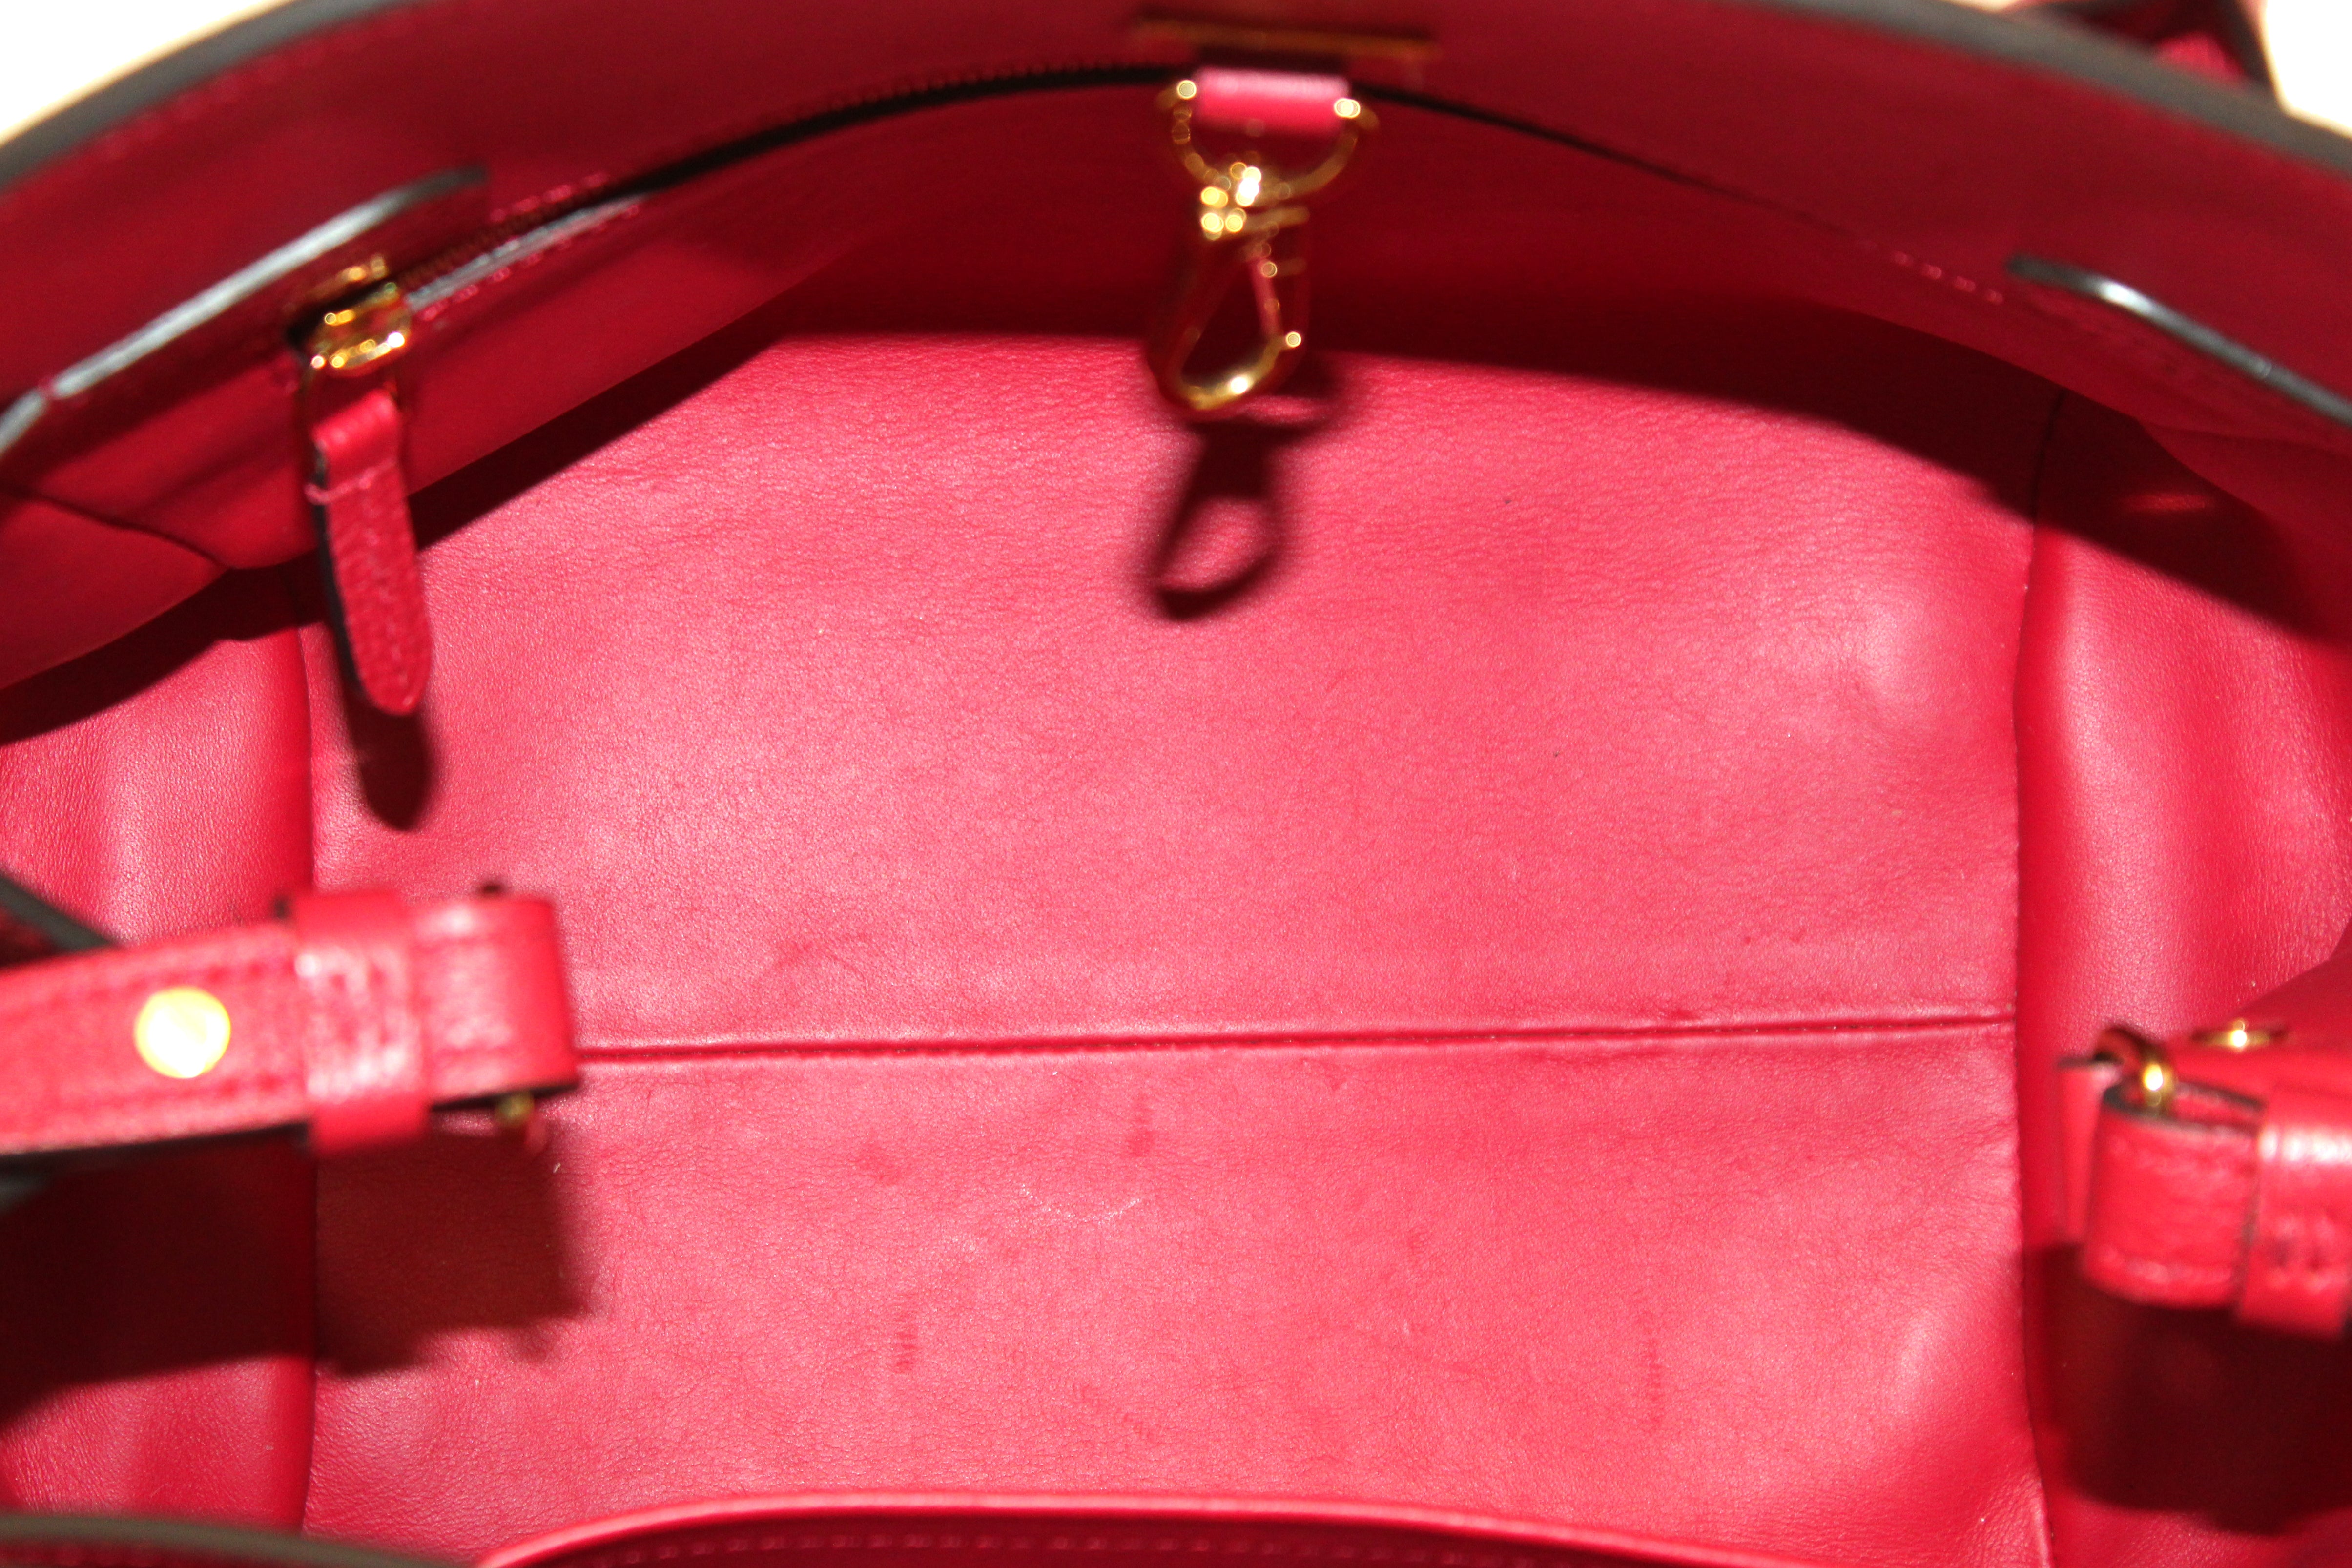 LOUIS VUITTON Authentic Red W Veau PM Cashmere Leather Tote